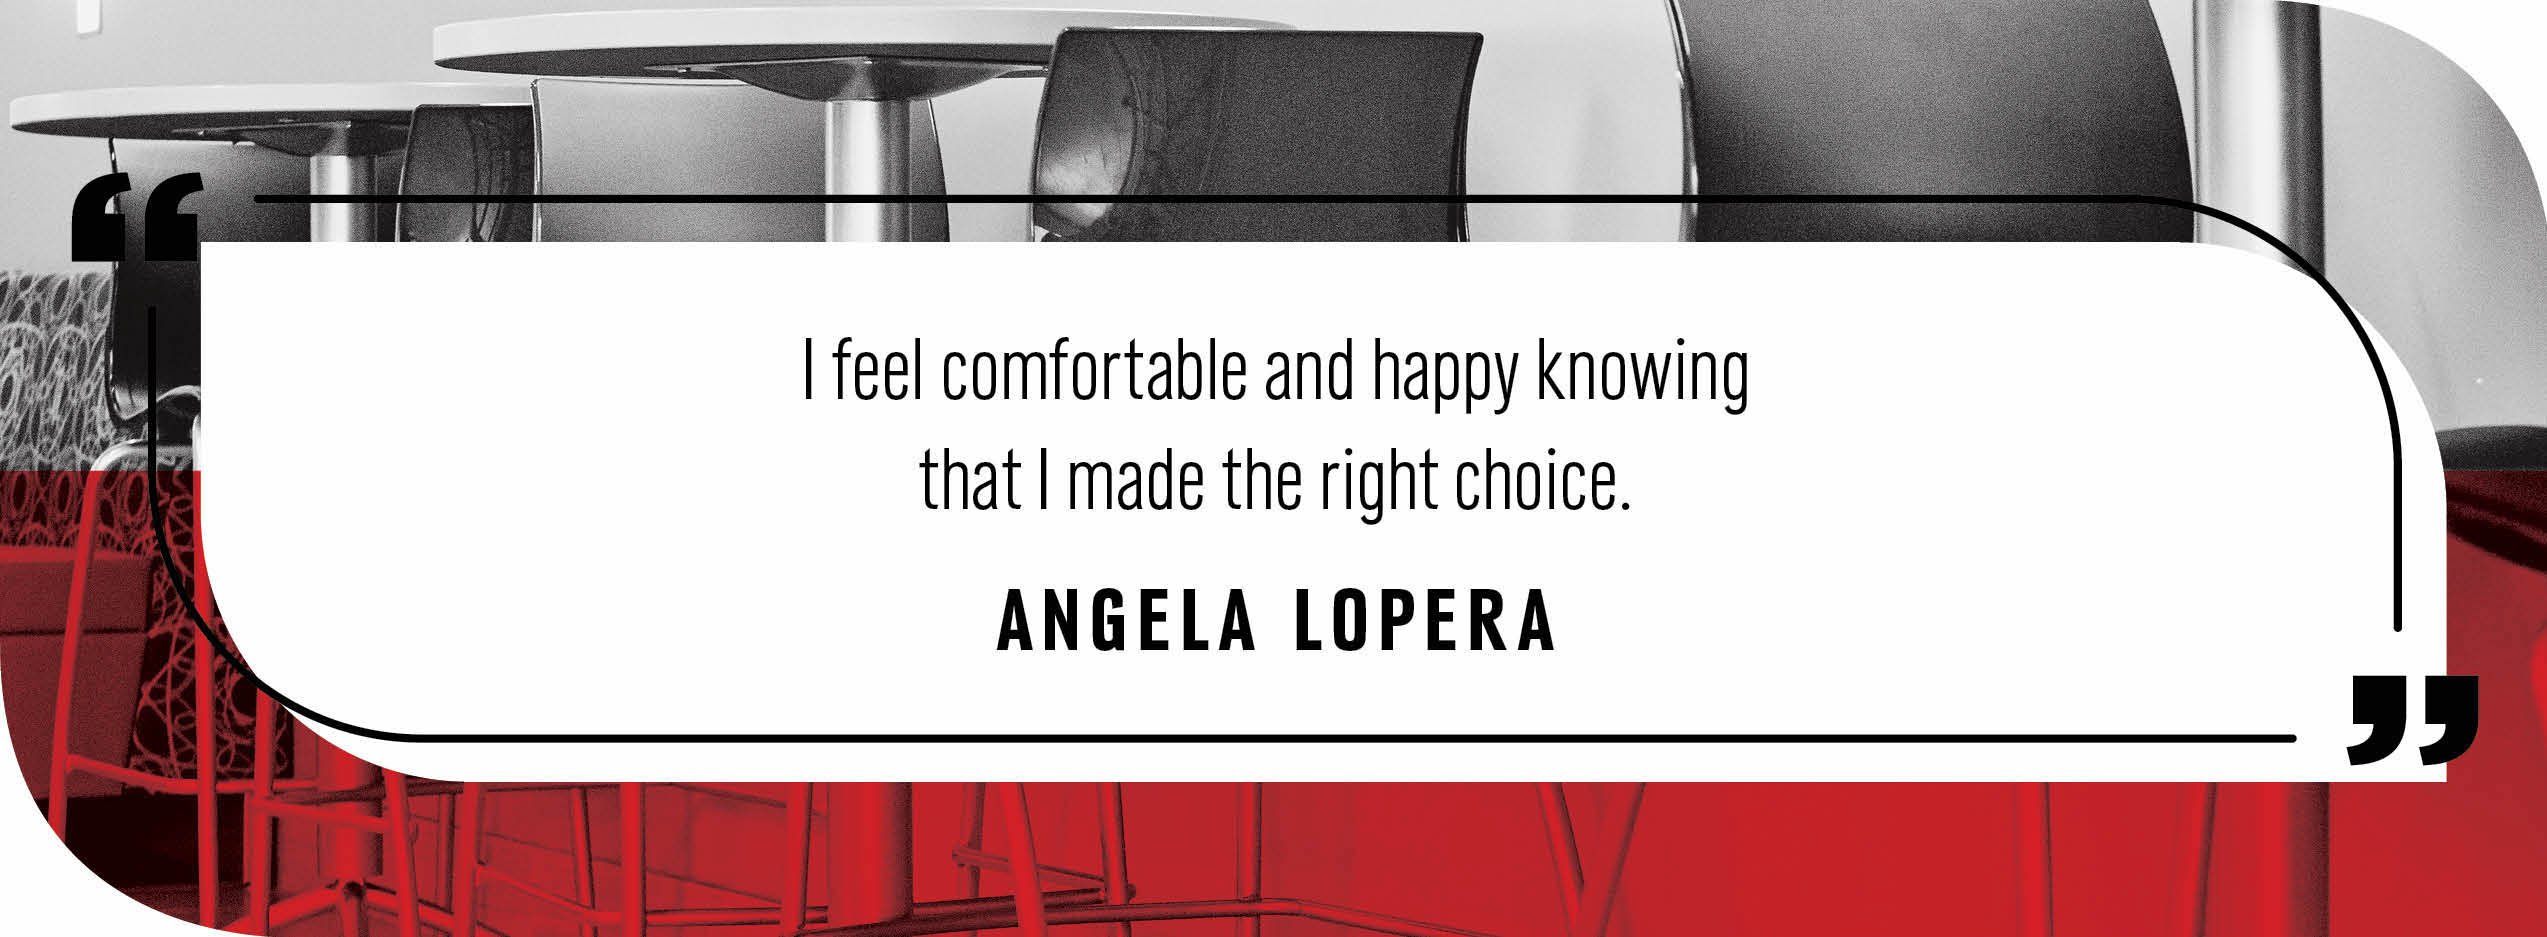 Quote by Angela Lopera: "I feel comfortable and happy knowing that I made the right choice."